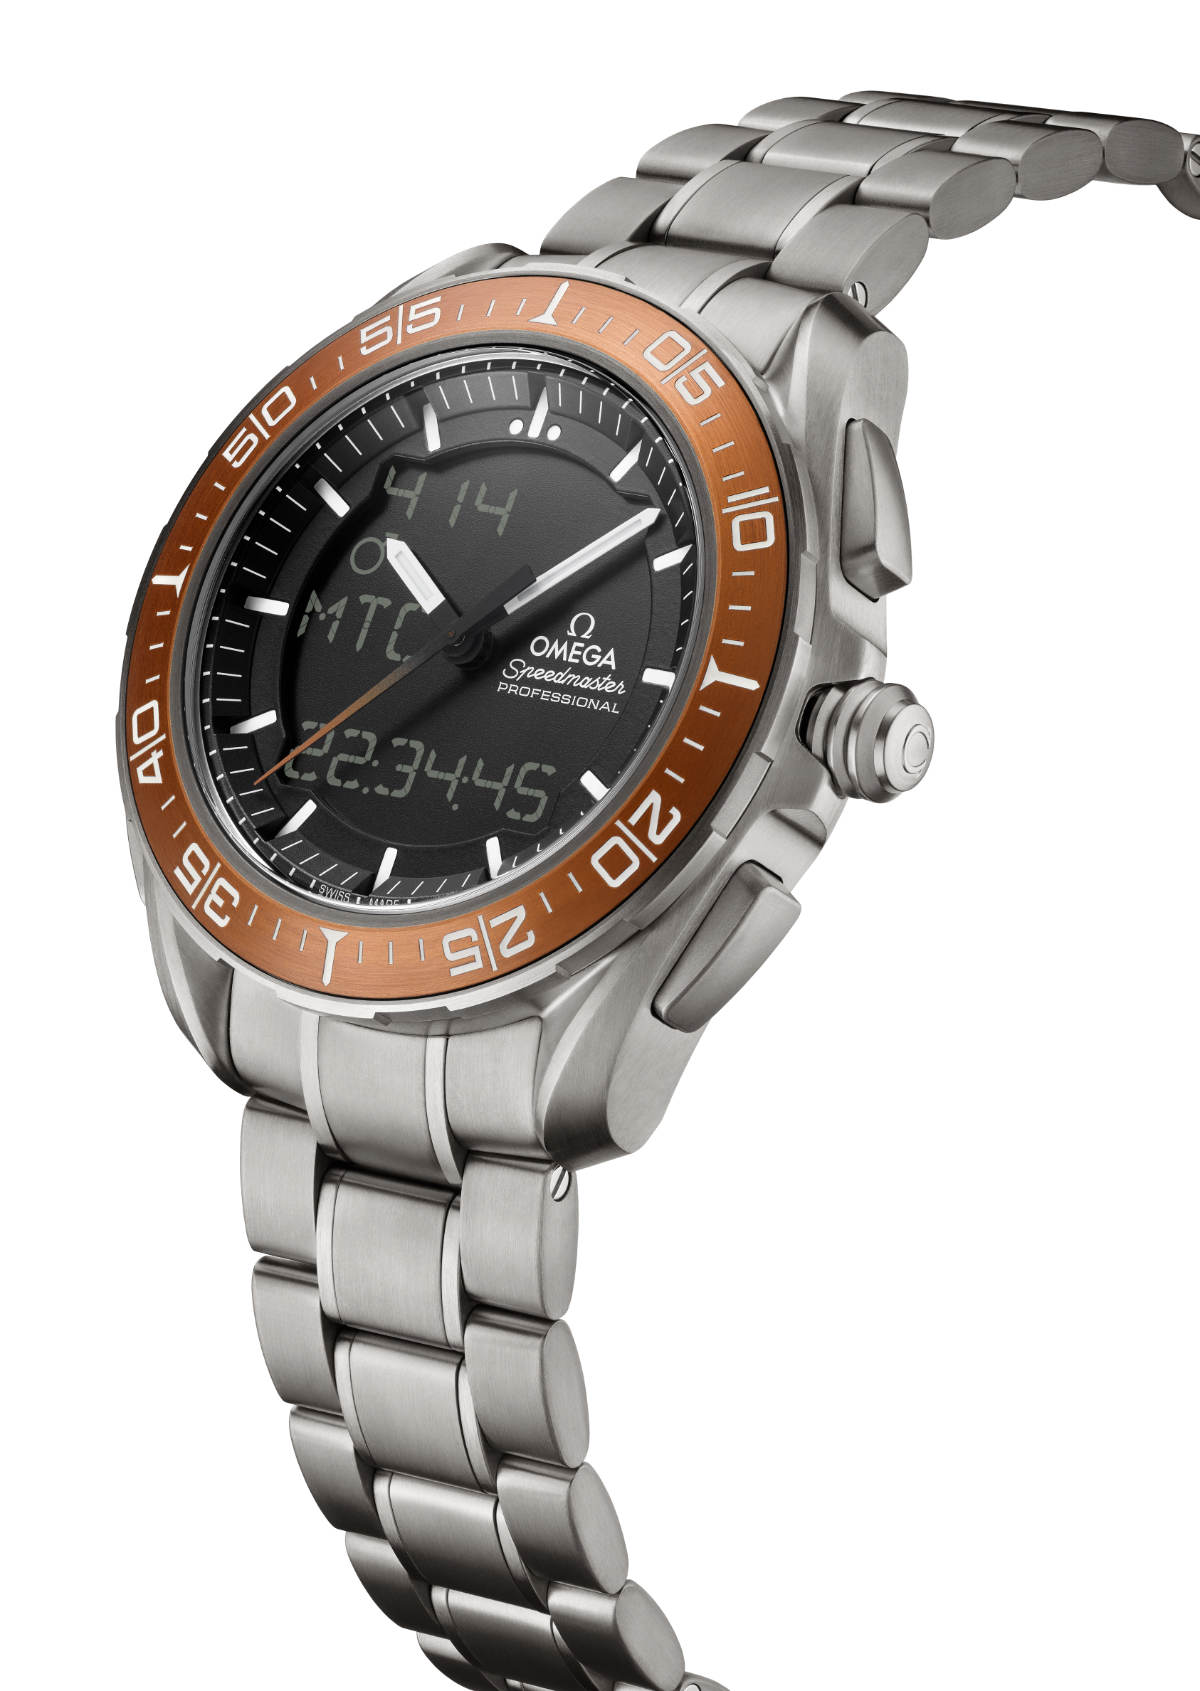 OMEGA's New Speedmaster Designed To Measure Time On Planet Earth - And Mars